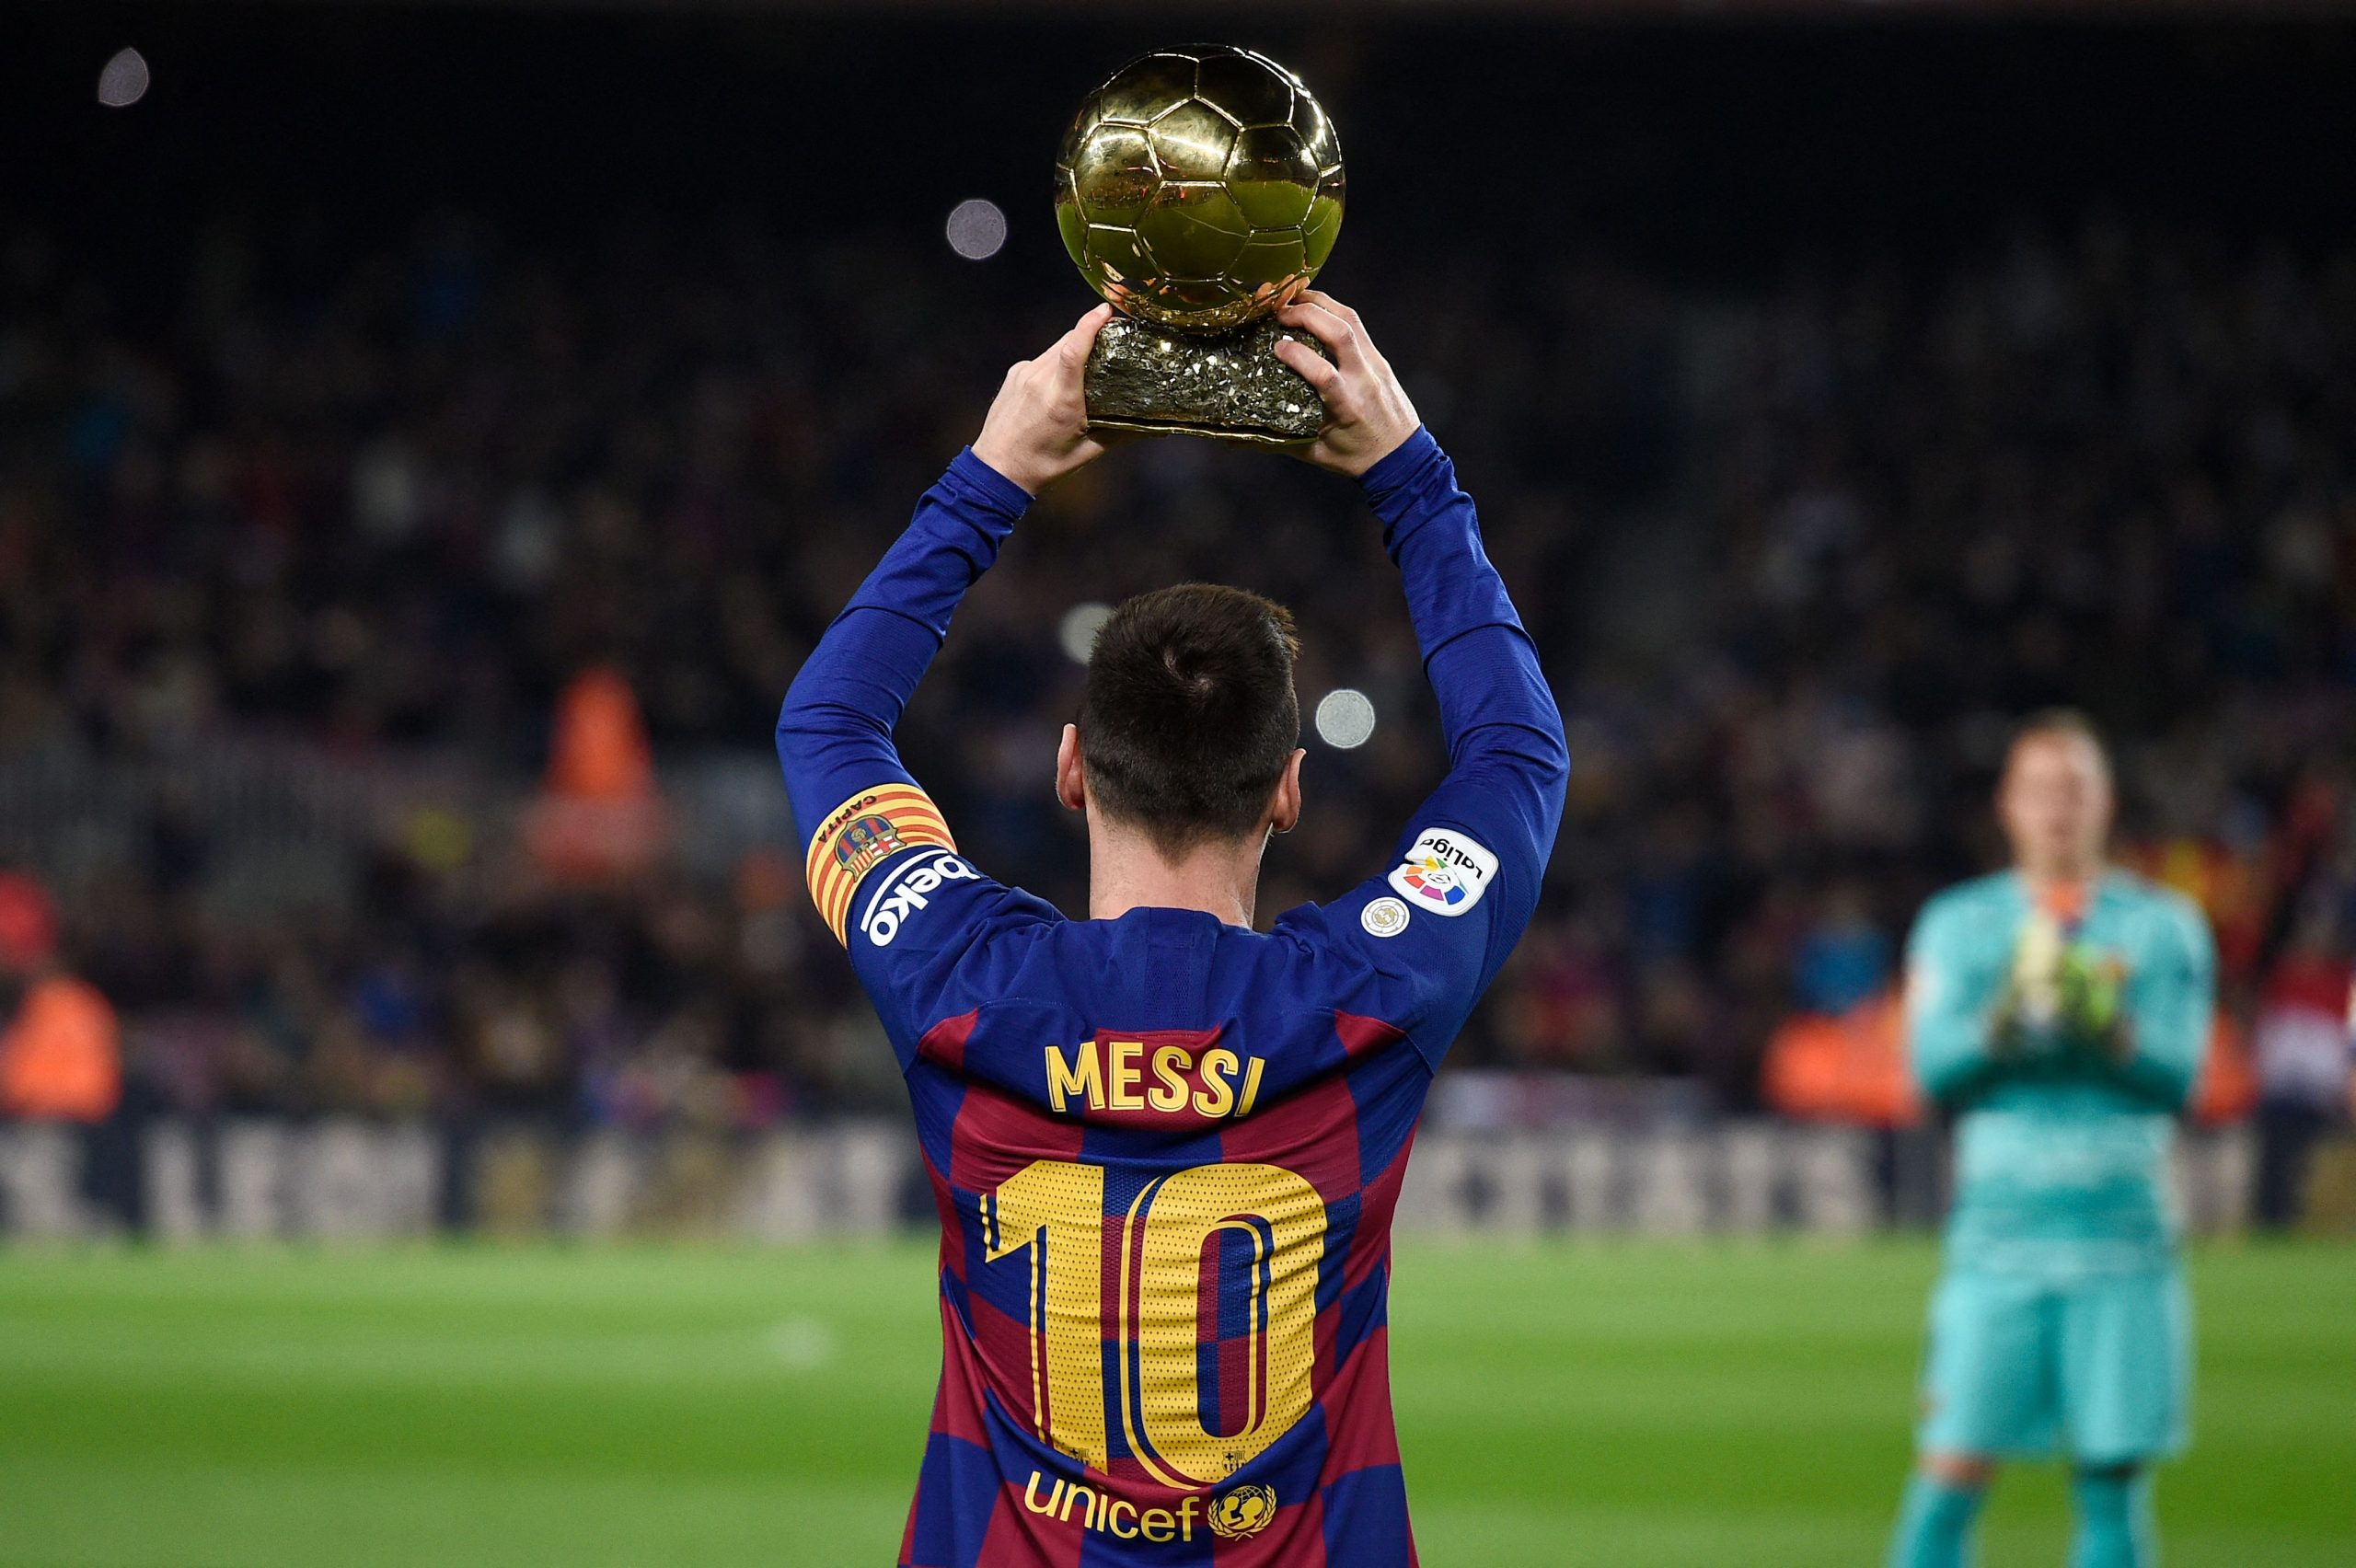 Pele actually has same number of Ballon d'Ors as Lionel Messi according to  France Football